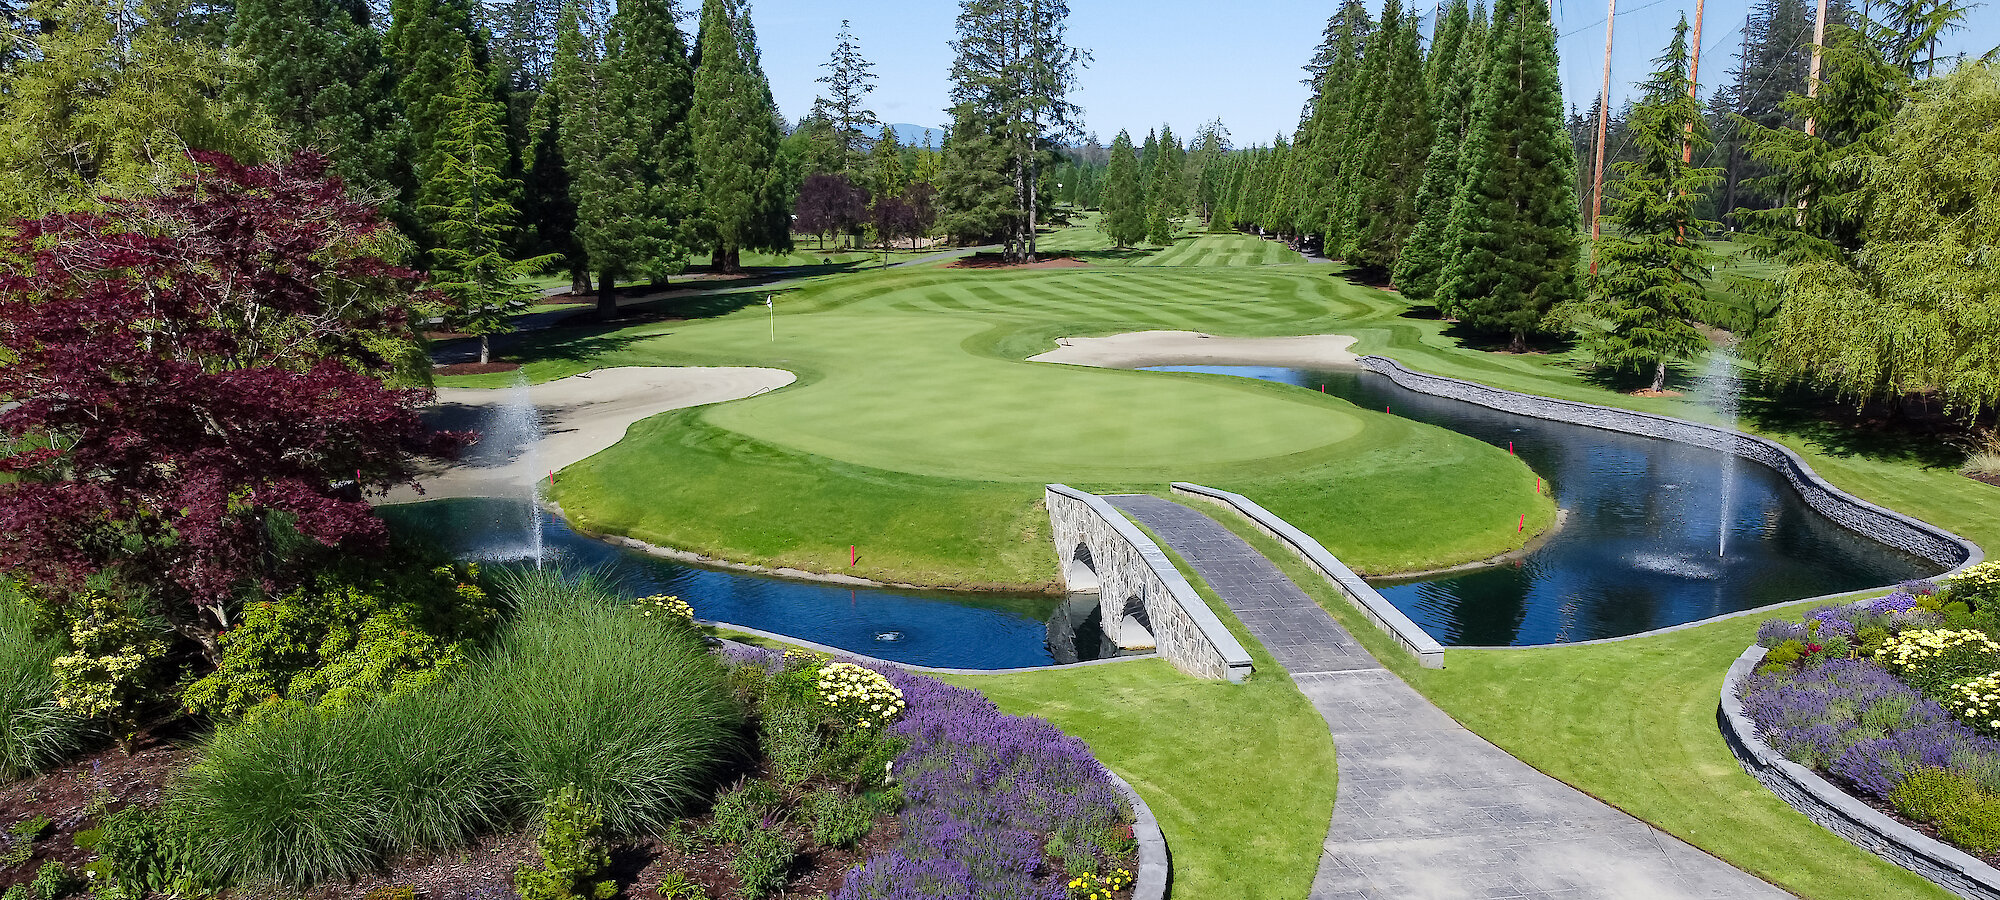 hole 18 is almost an island of green, surrounded by a water feature with two fountains, and lush gardens as well as a bridge to walk over to get off the green